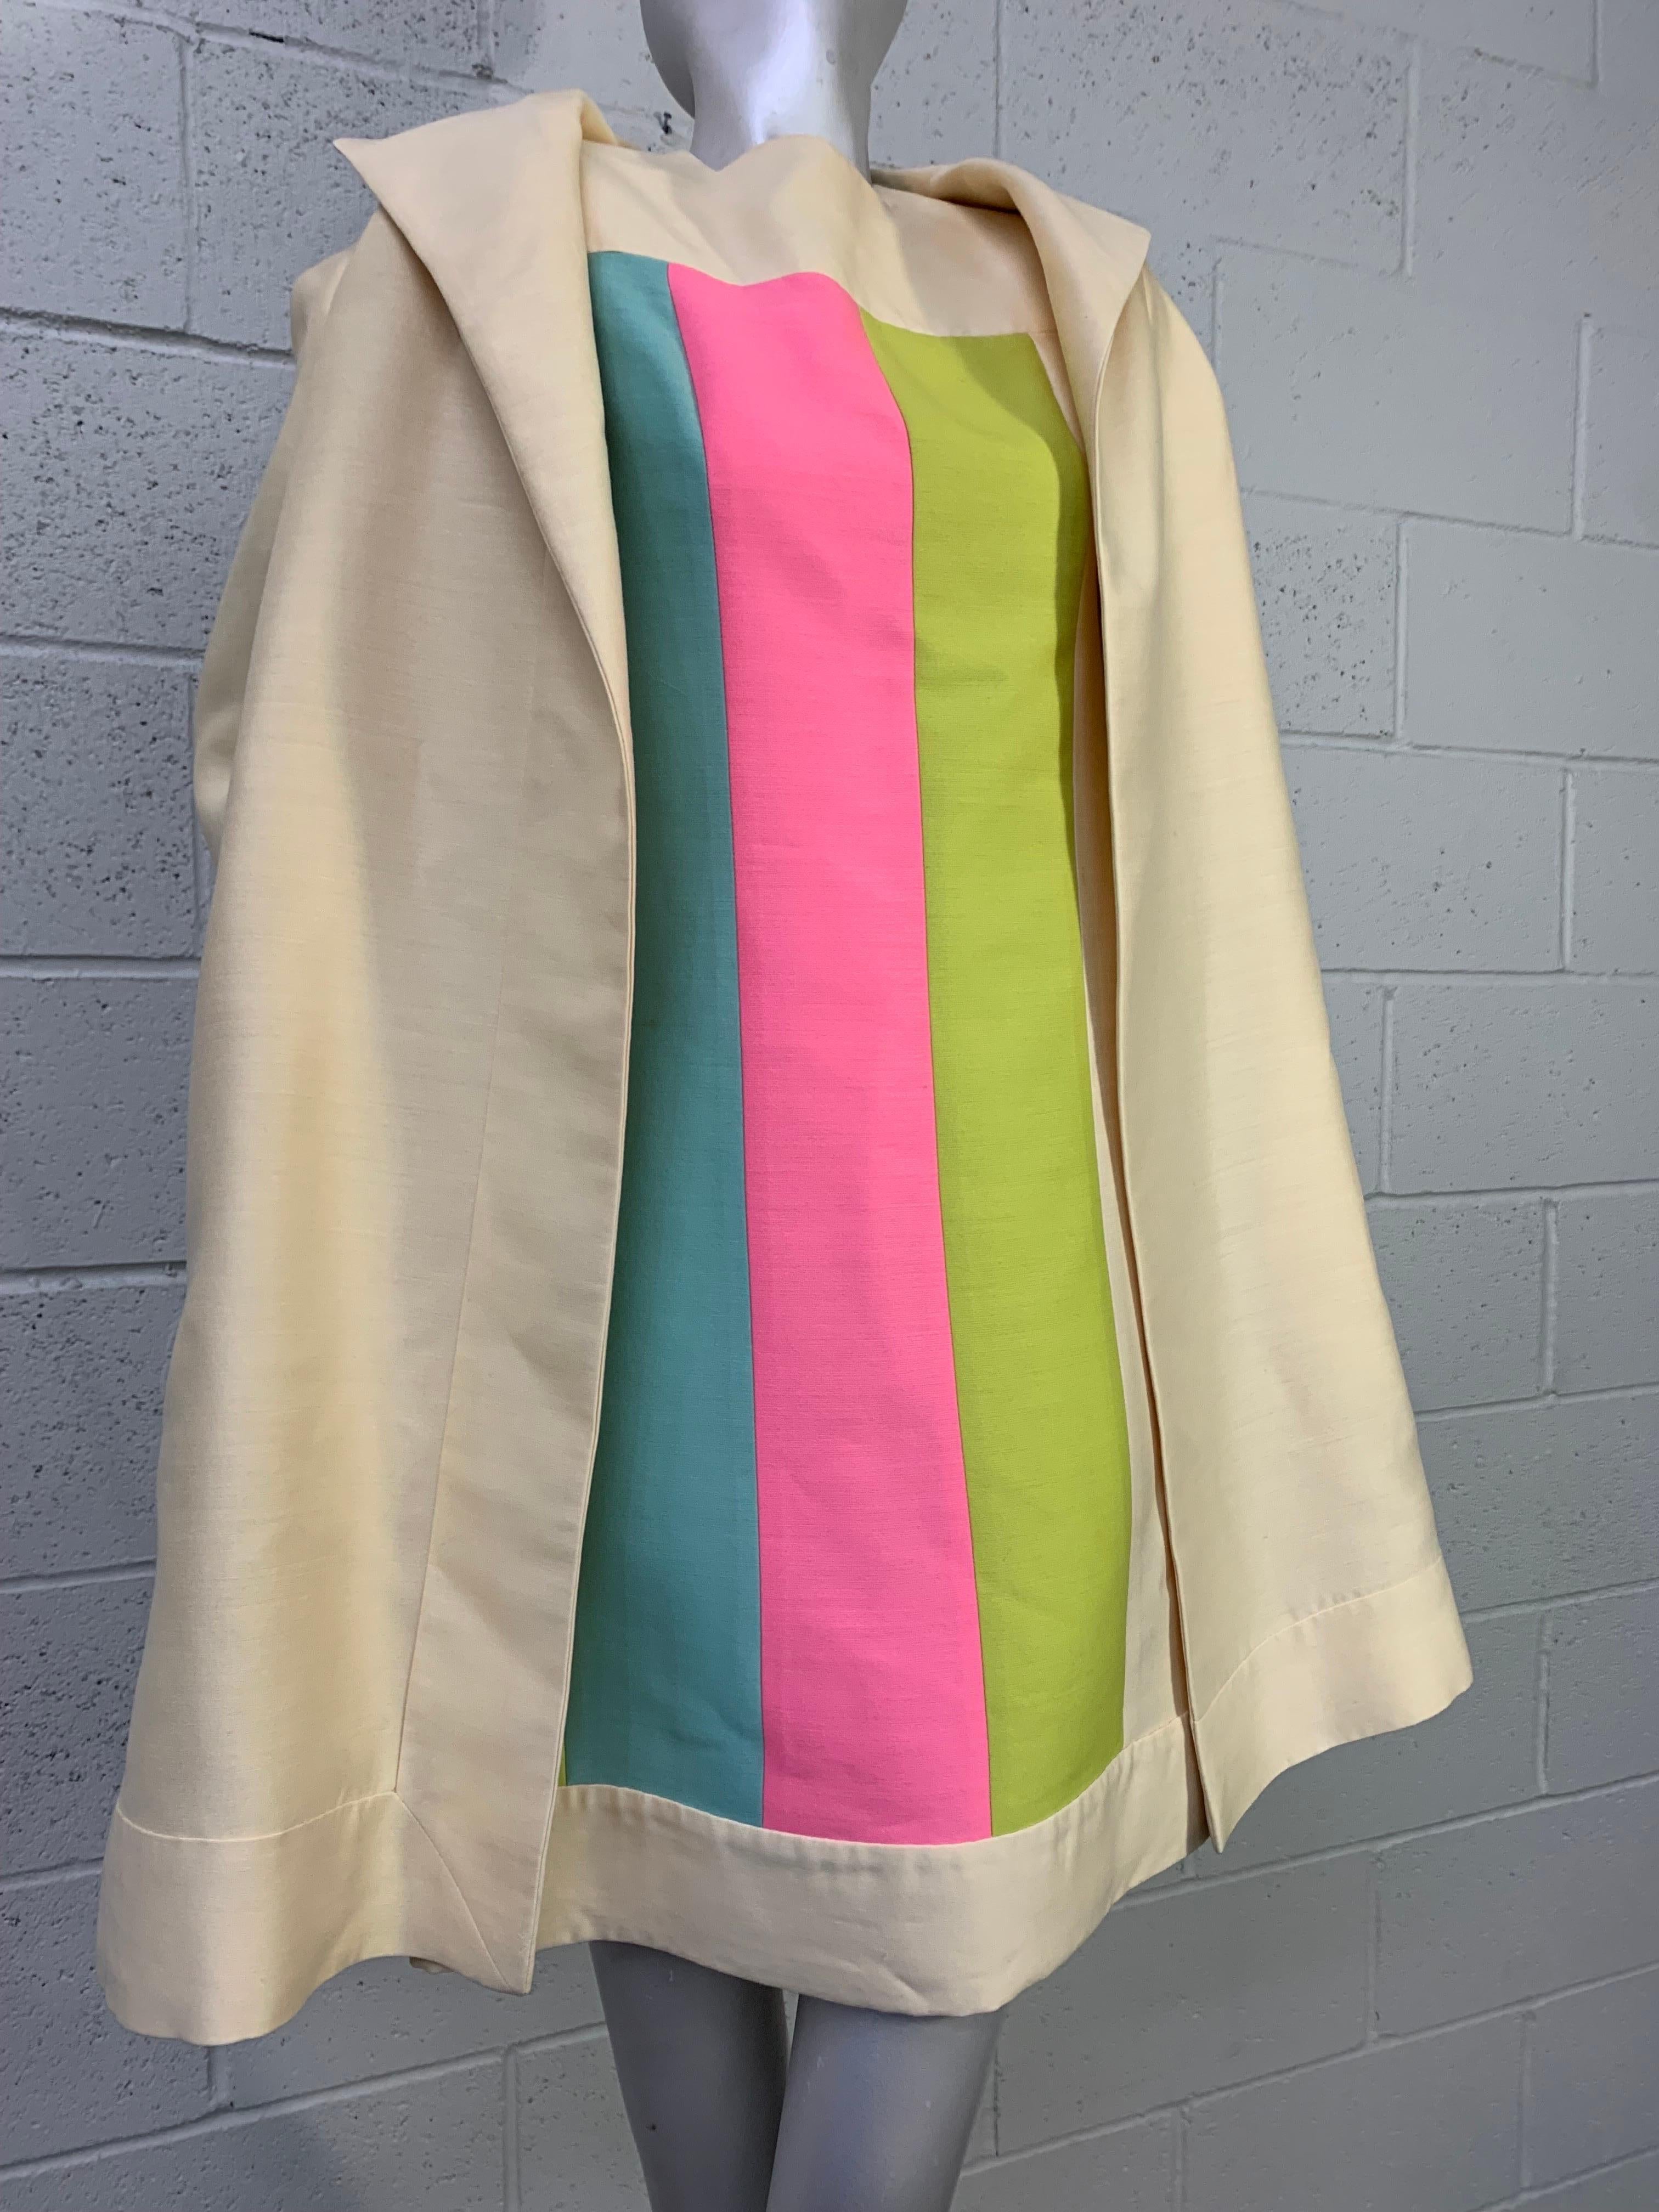 1960s Lilli Ann Mod Pastel Color-Block A-Line Dress & Trapeze Coat Ensemble: Sleeveless dress in spring-weight cream silk and wool blend with vertical pink, turquoise and chartreuse blocks. Banded hem, neckline and armholes. Fully lined. Zipper